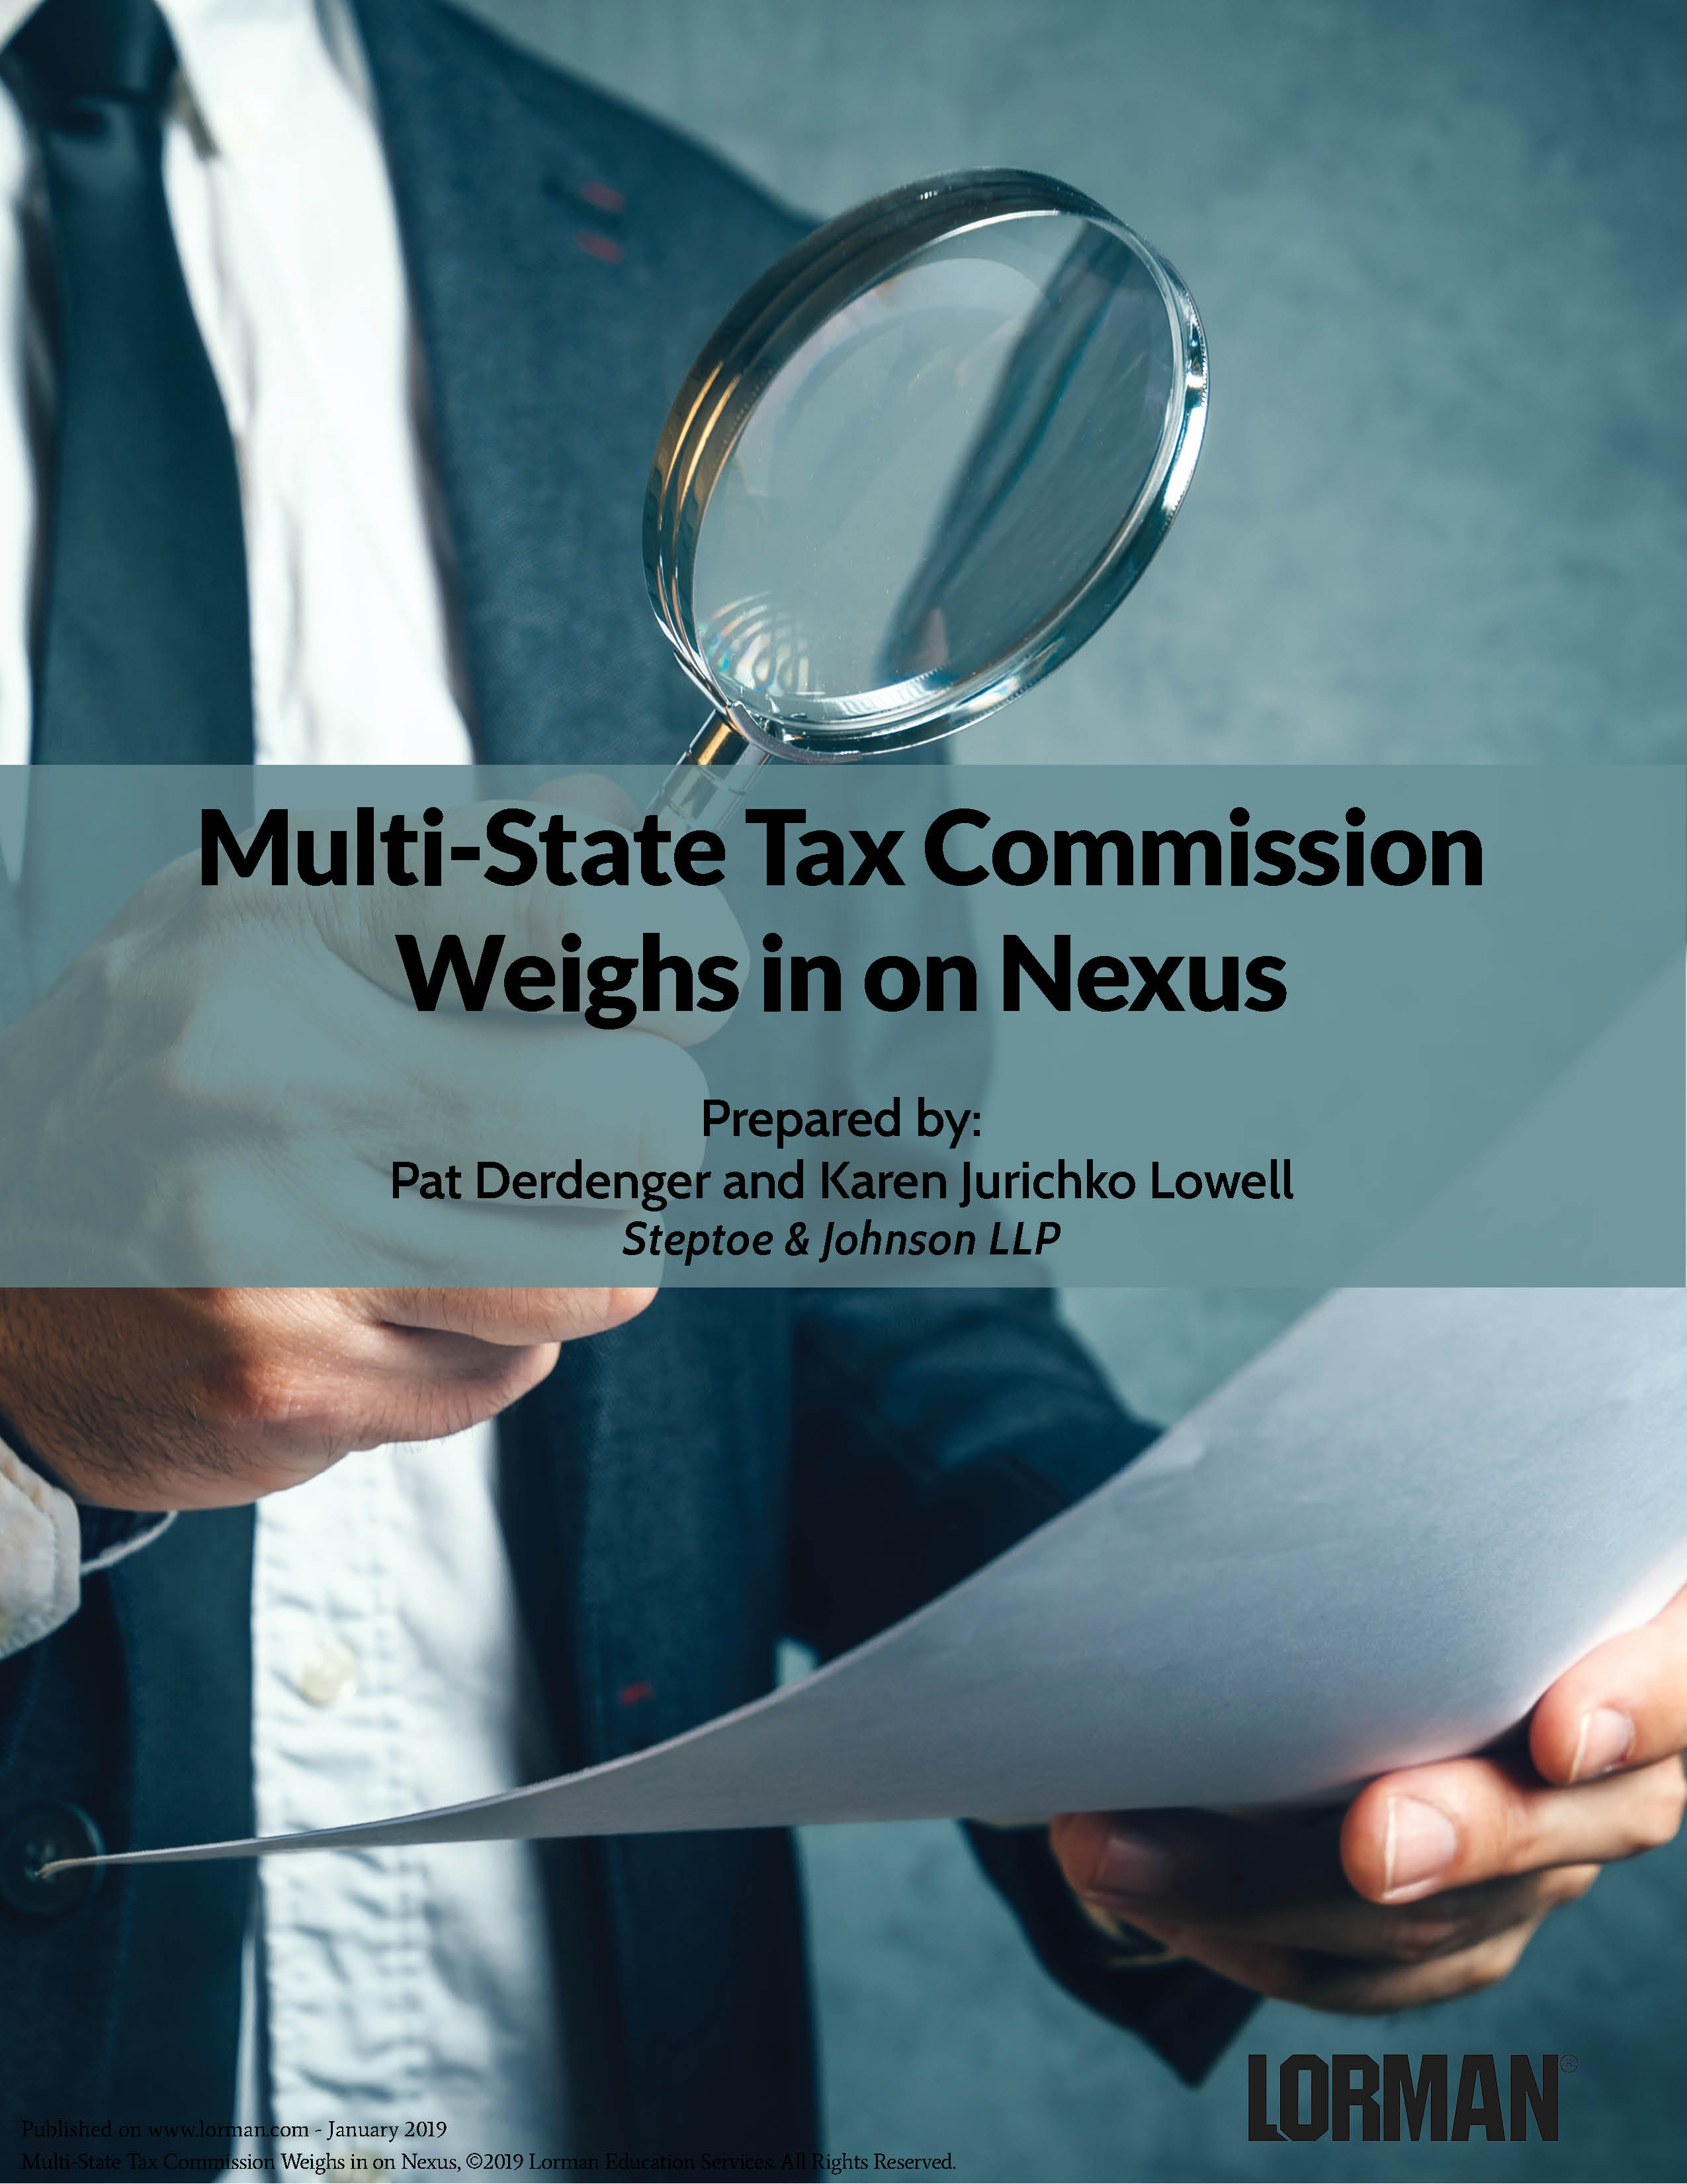 Multi-State Tax Commission Weighs in on Nexus